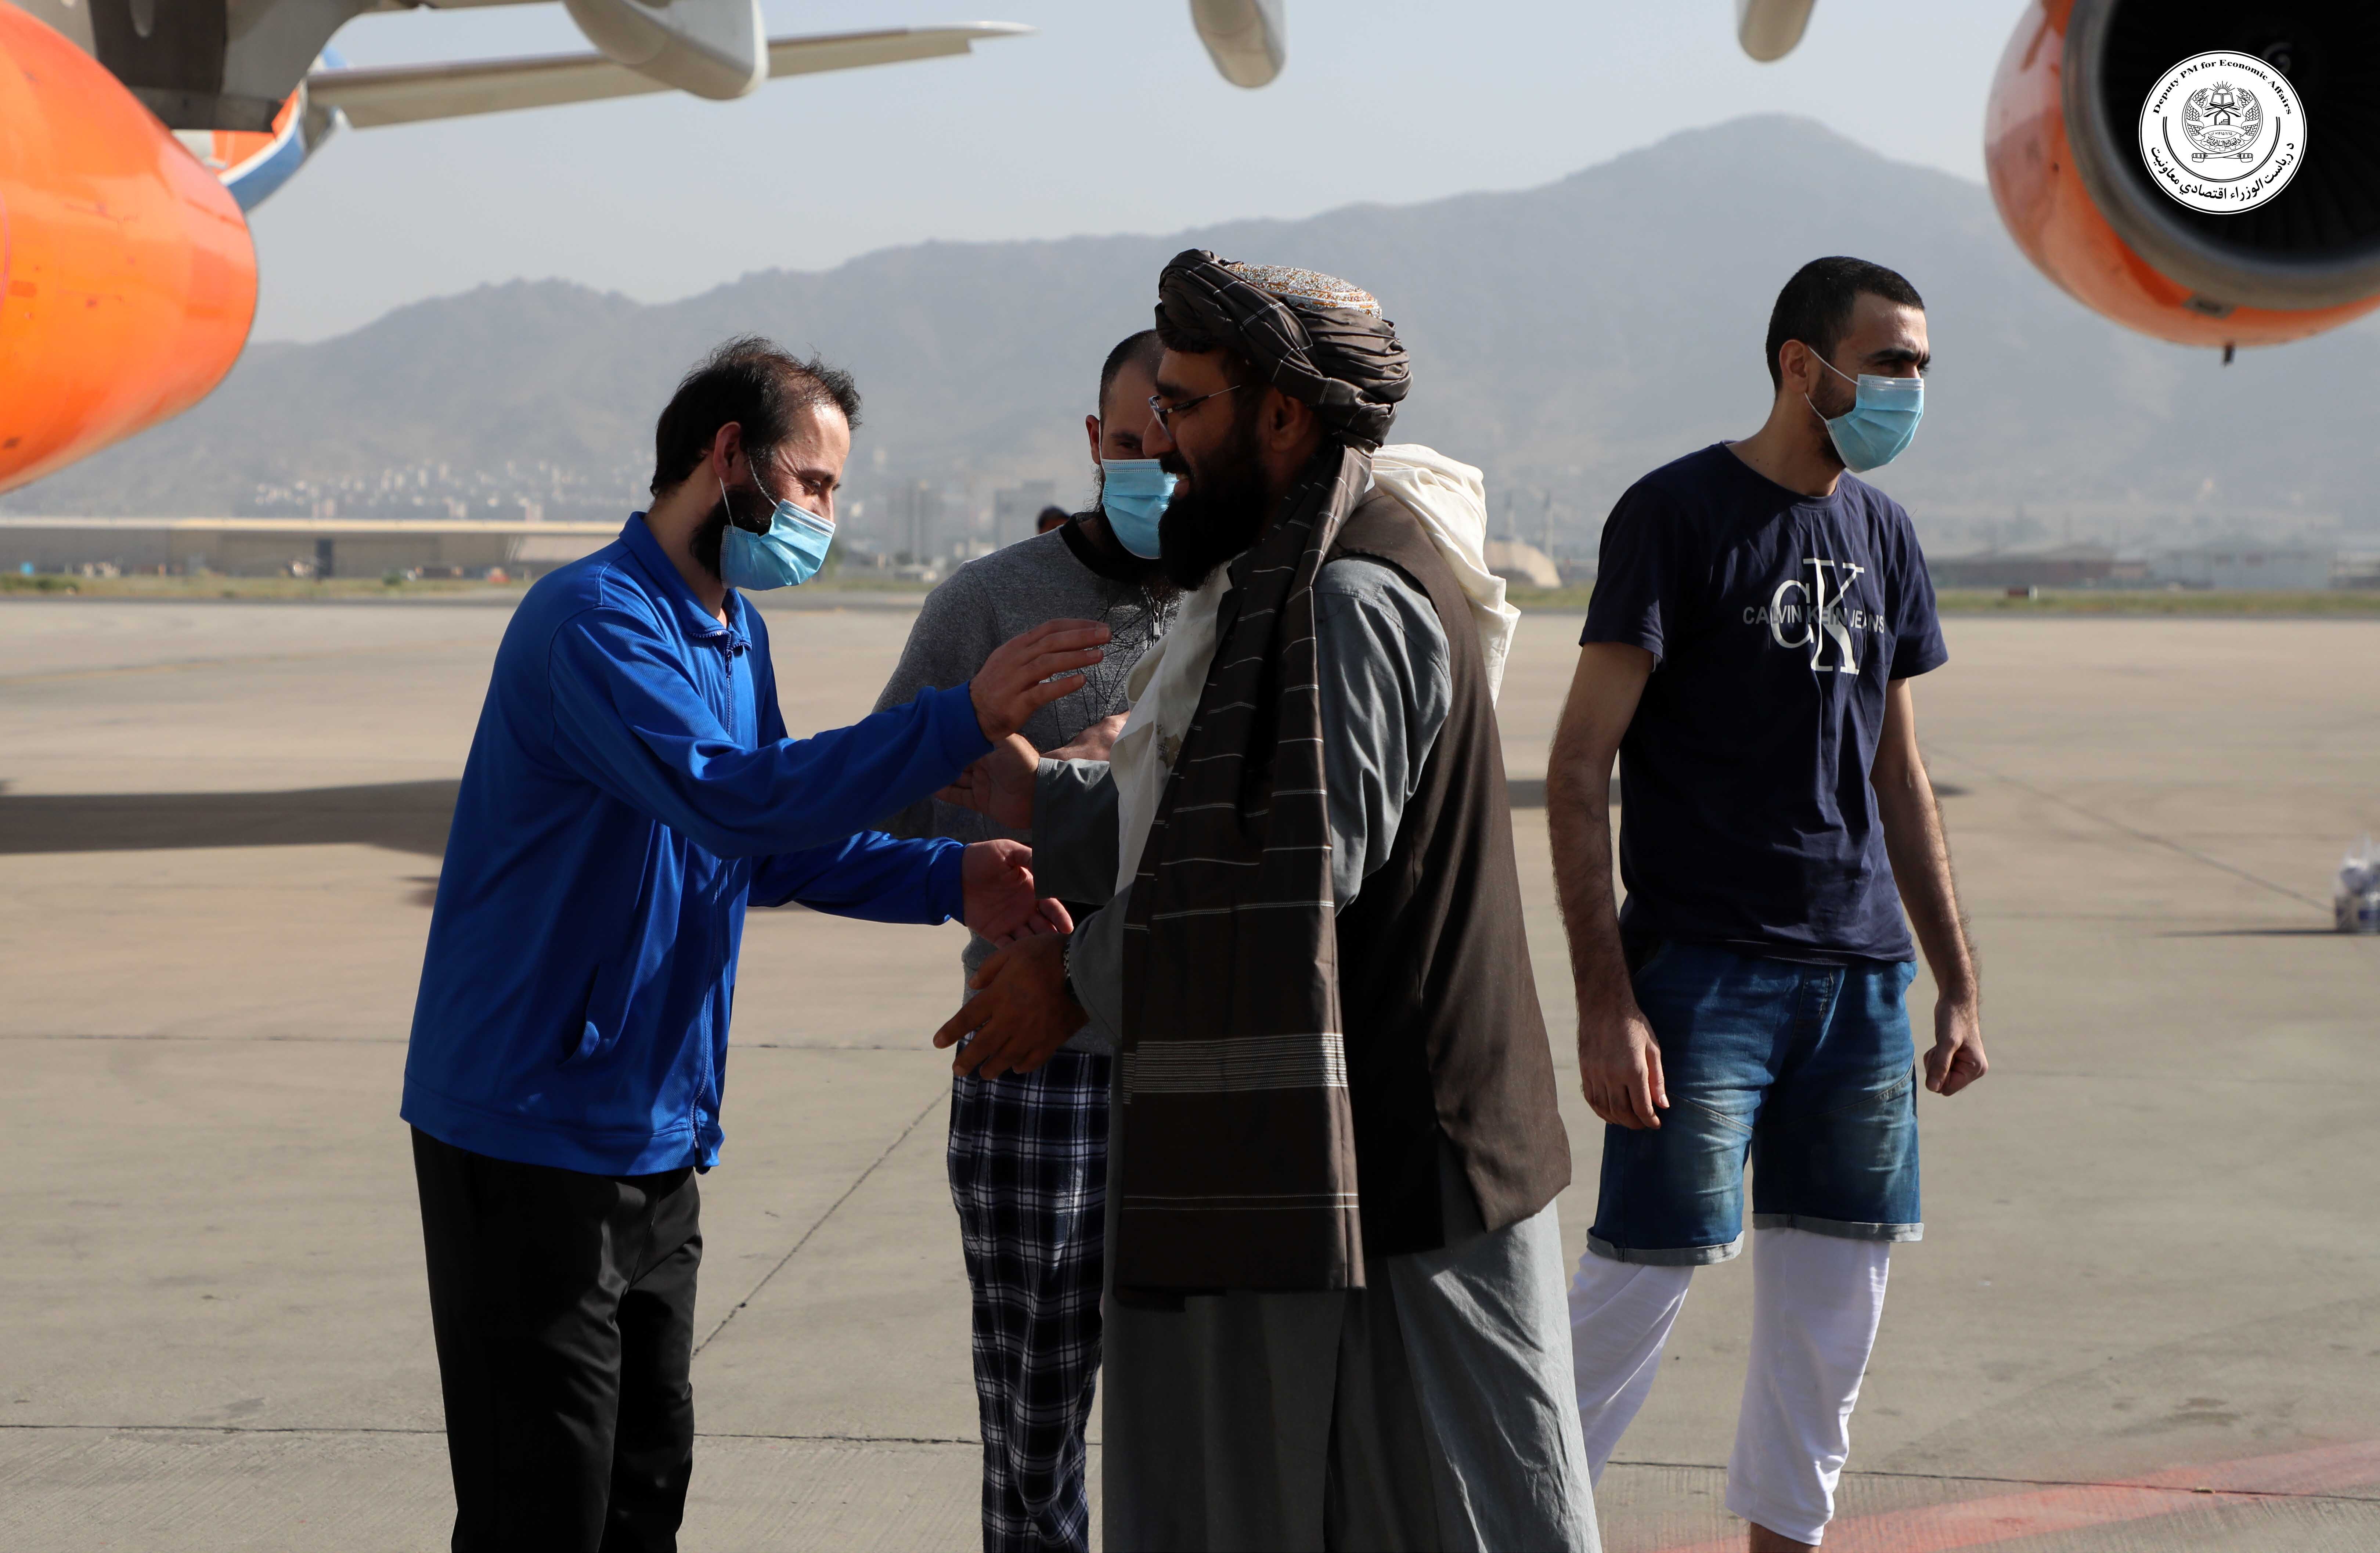 12 Afghans were released from the UAE prison and returned to their country today